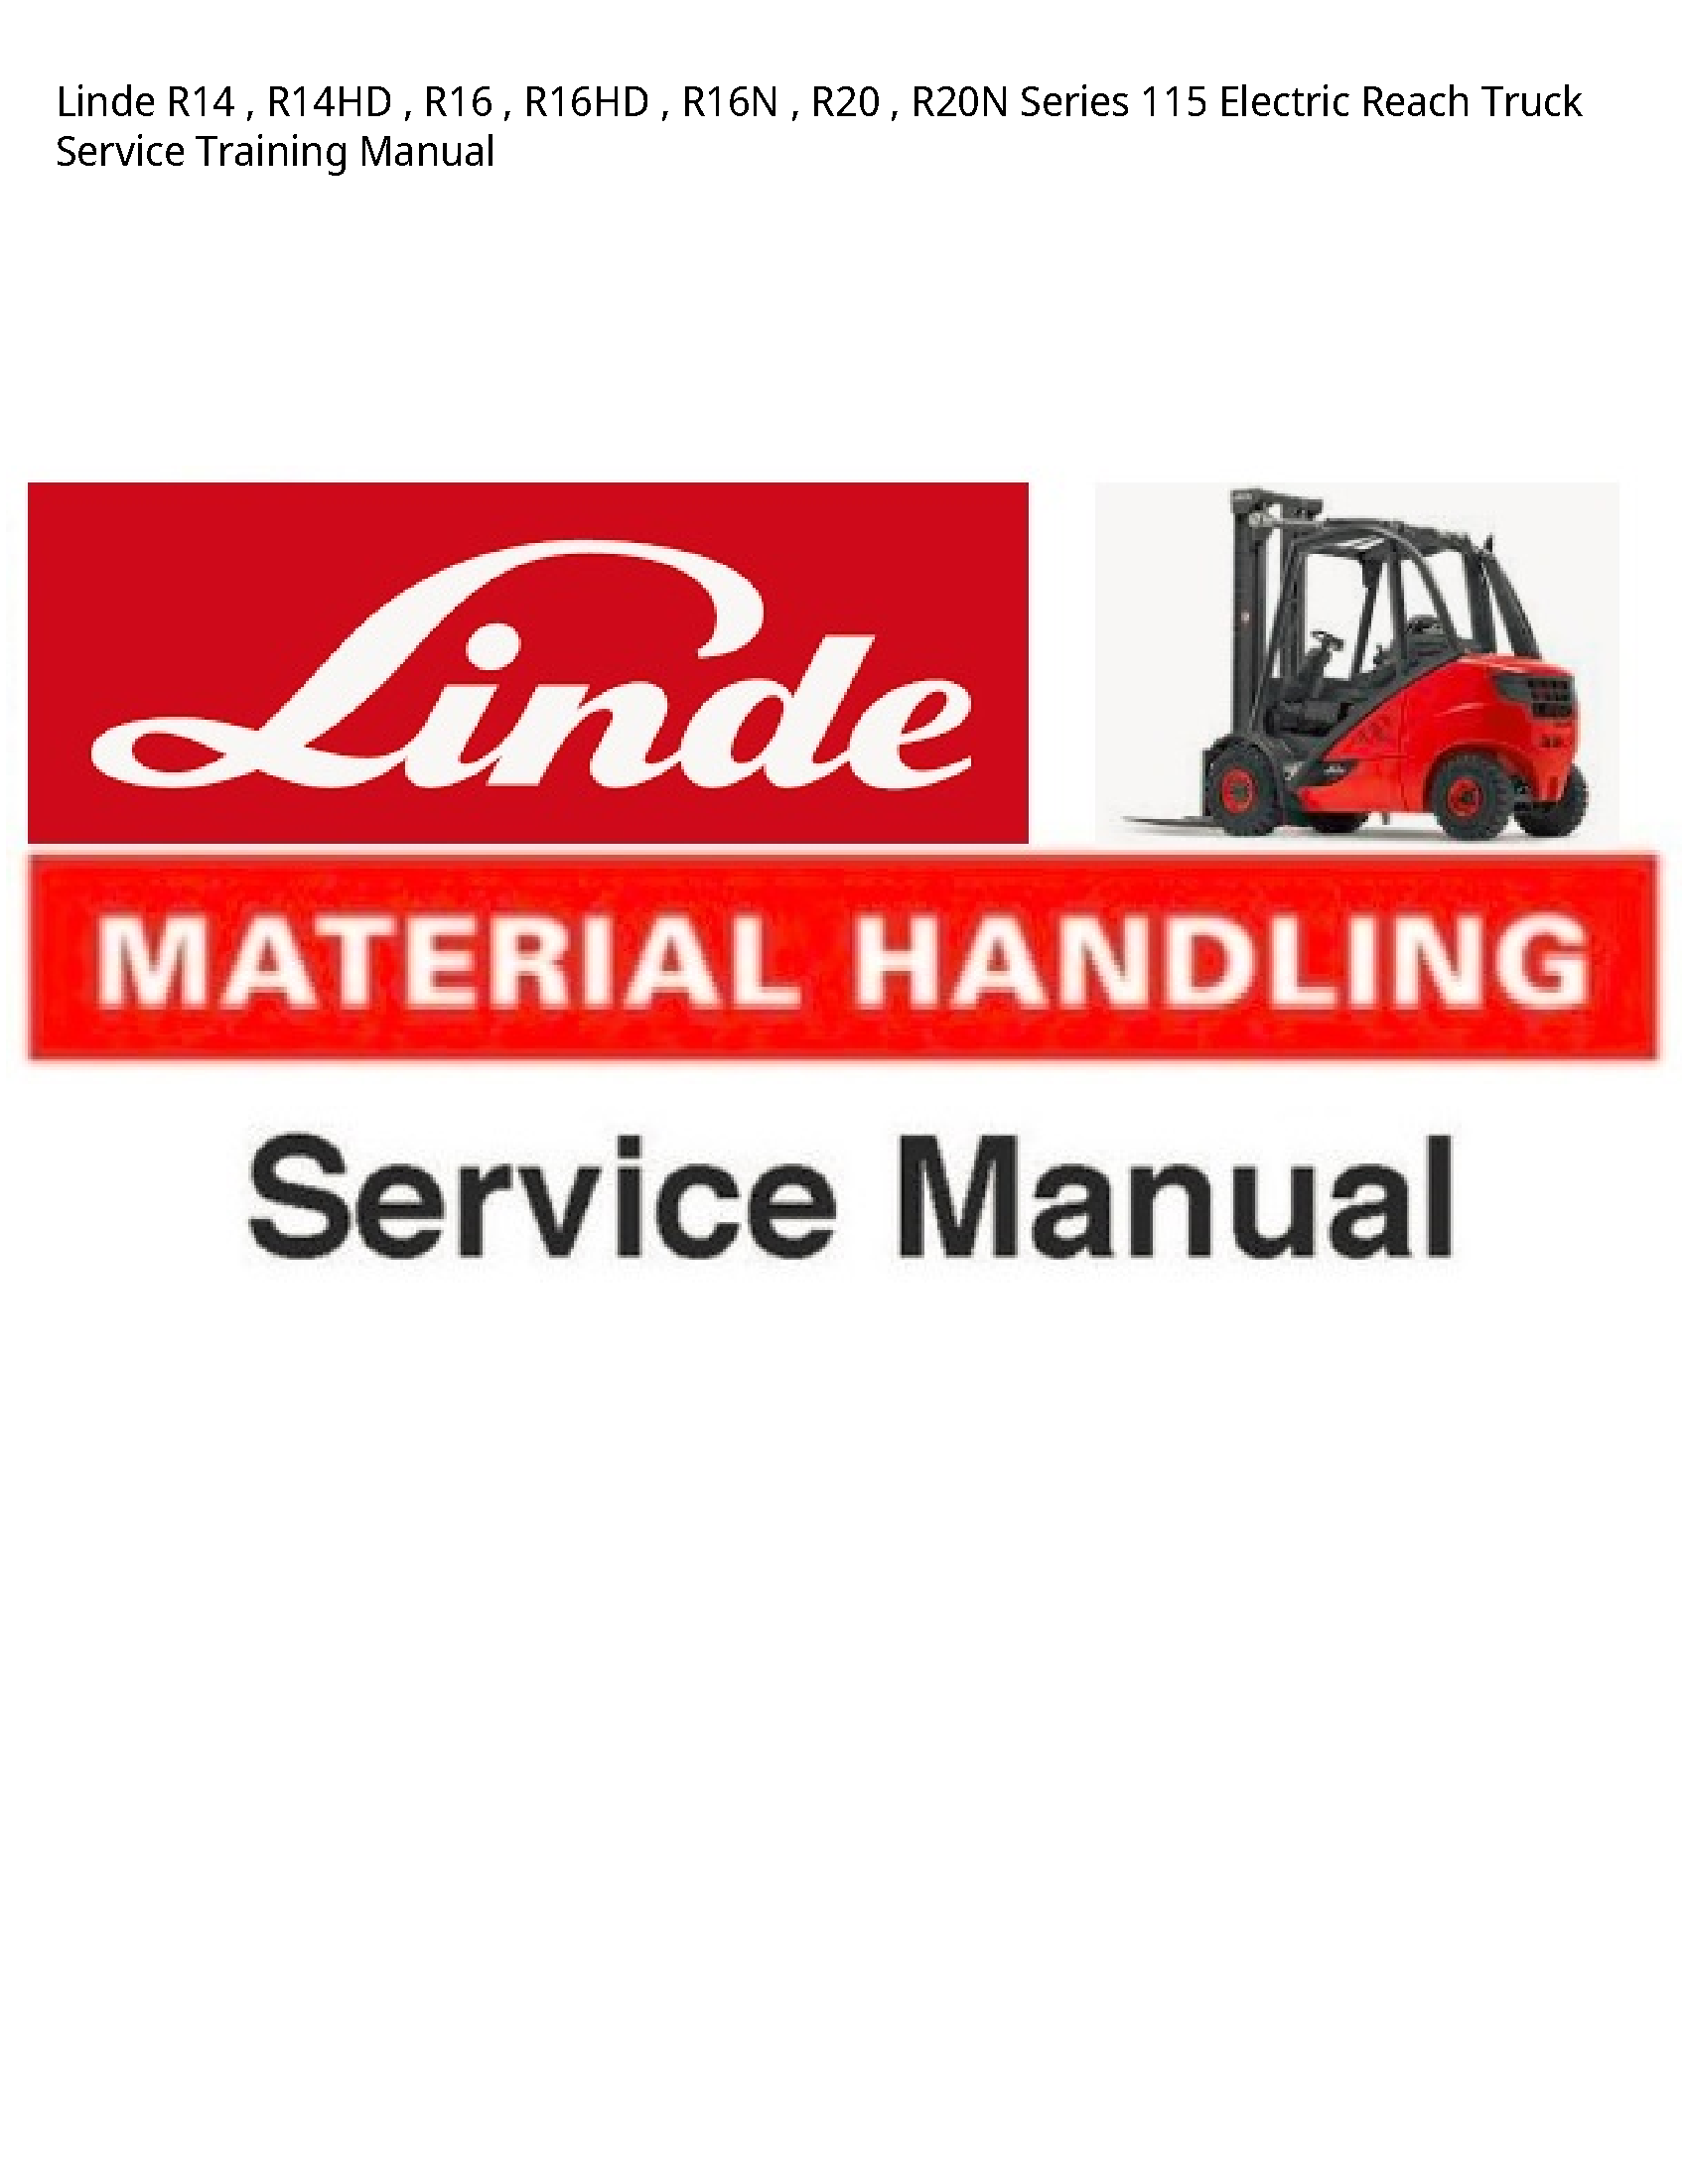 Linde R14 Series Electric Reach Truck Service Training manual